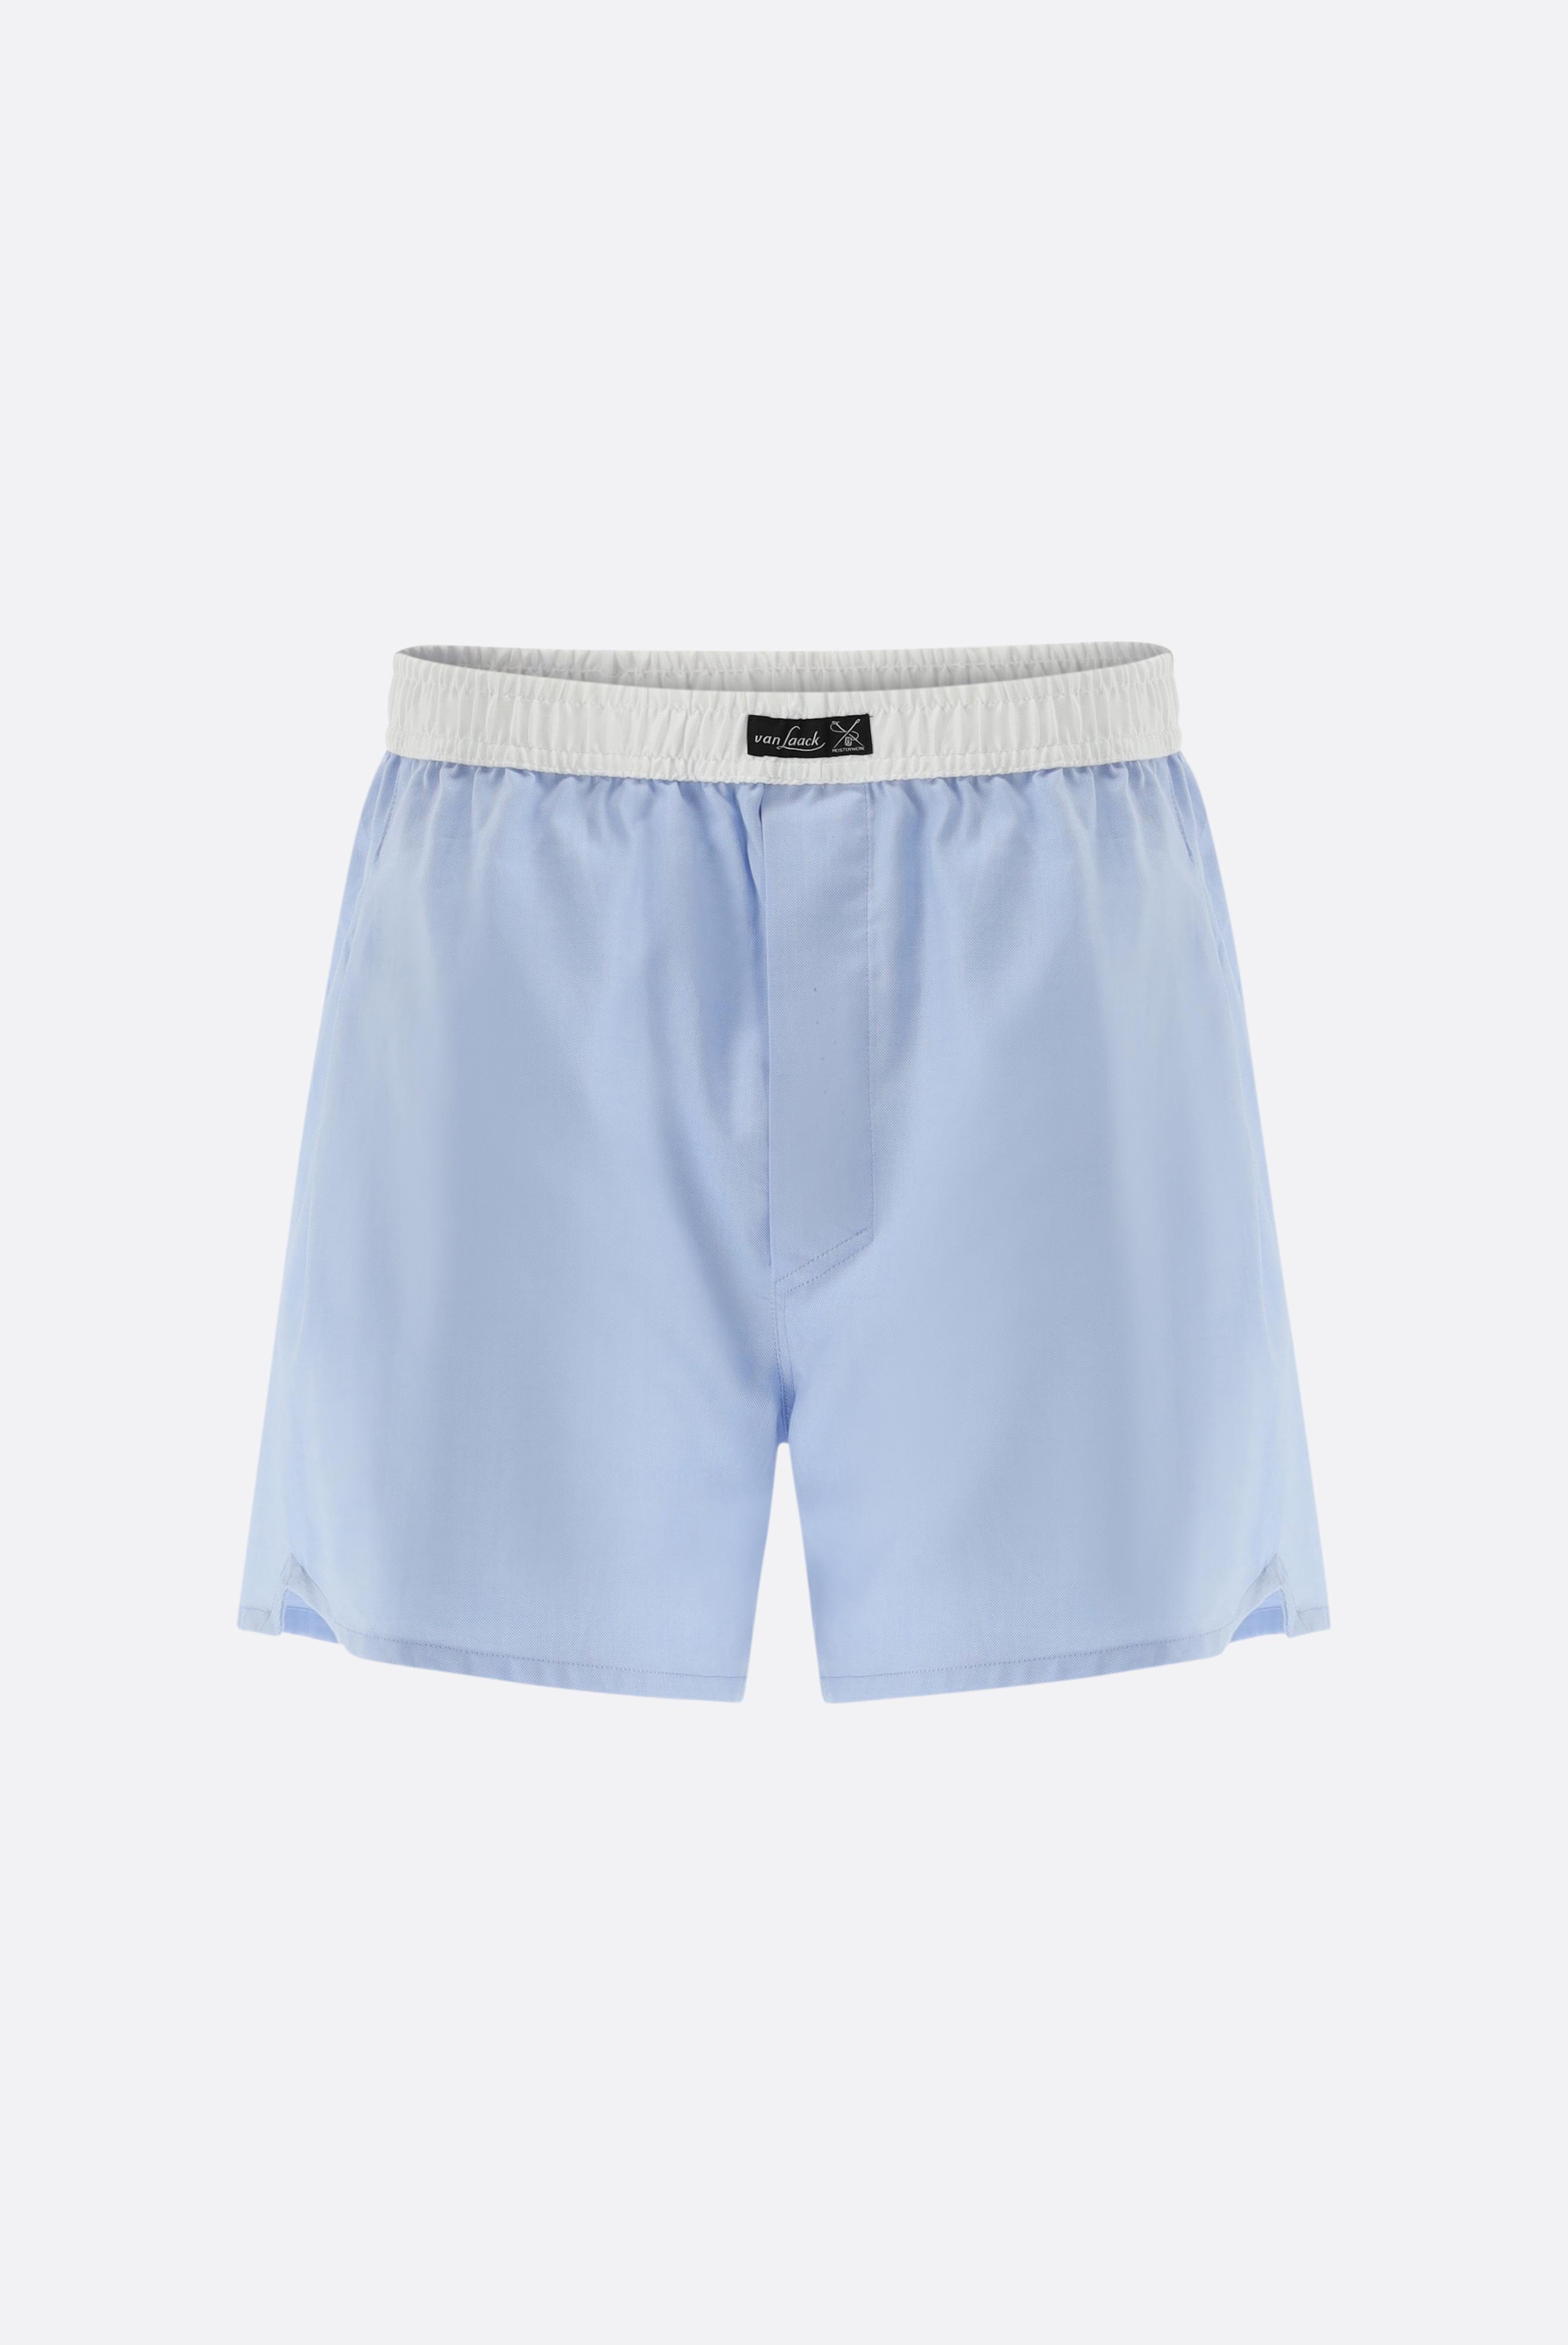 Underwear+Oxford Boxer Shorts with Waistband Contrast+91.1100.V1.150251.730.46